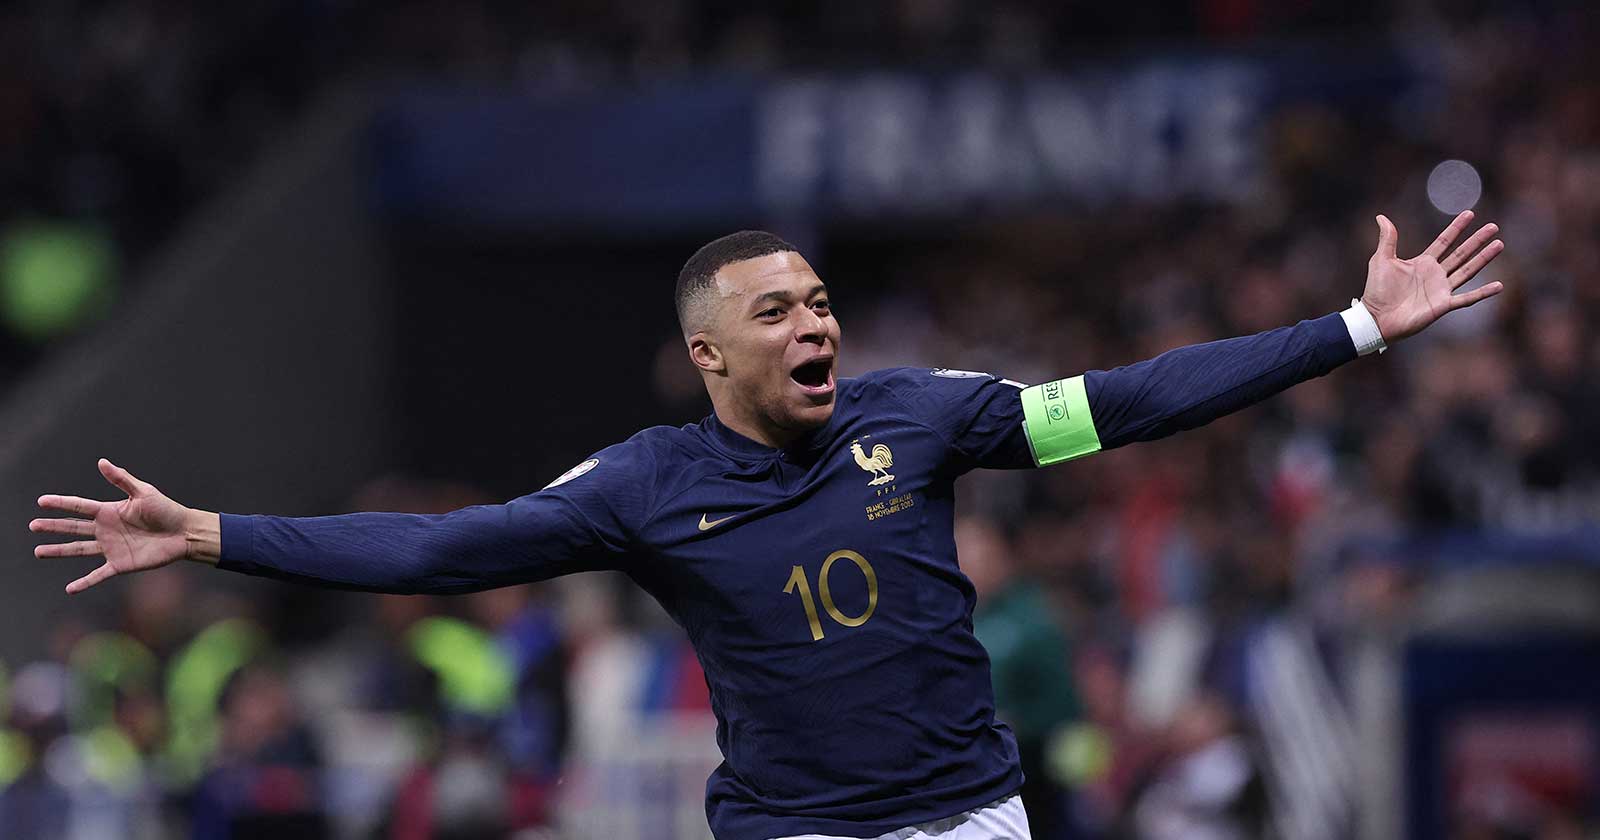 France's forward #10 Kylian Mbappe celebrates after scoring a goal during the UEFA EURO 2024 Group B qualifying football match between France and Gibraltar at the Allianz Riviera stadium in Nice, southeastern France, on November 18, 2023. (Photo by FRANCK FIFE / AFP)